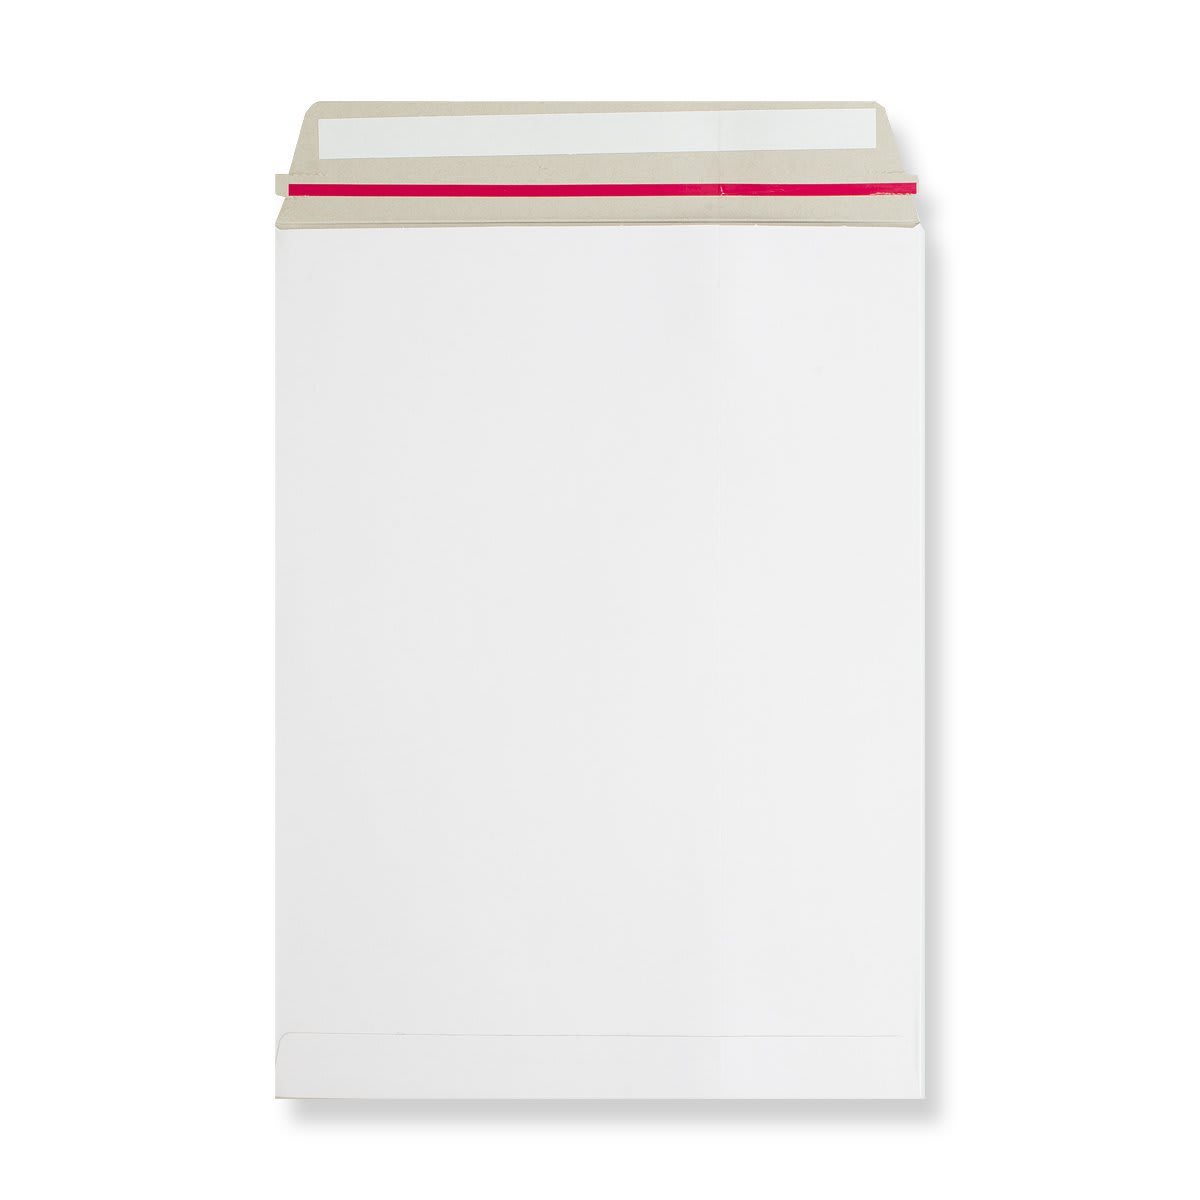 457x330 White All Board Pocket Peel & Seal Plain 350gsm Wove With Red Rippa Strip Envelopes